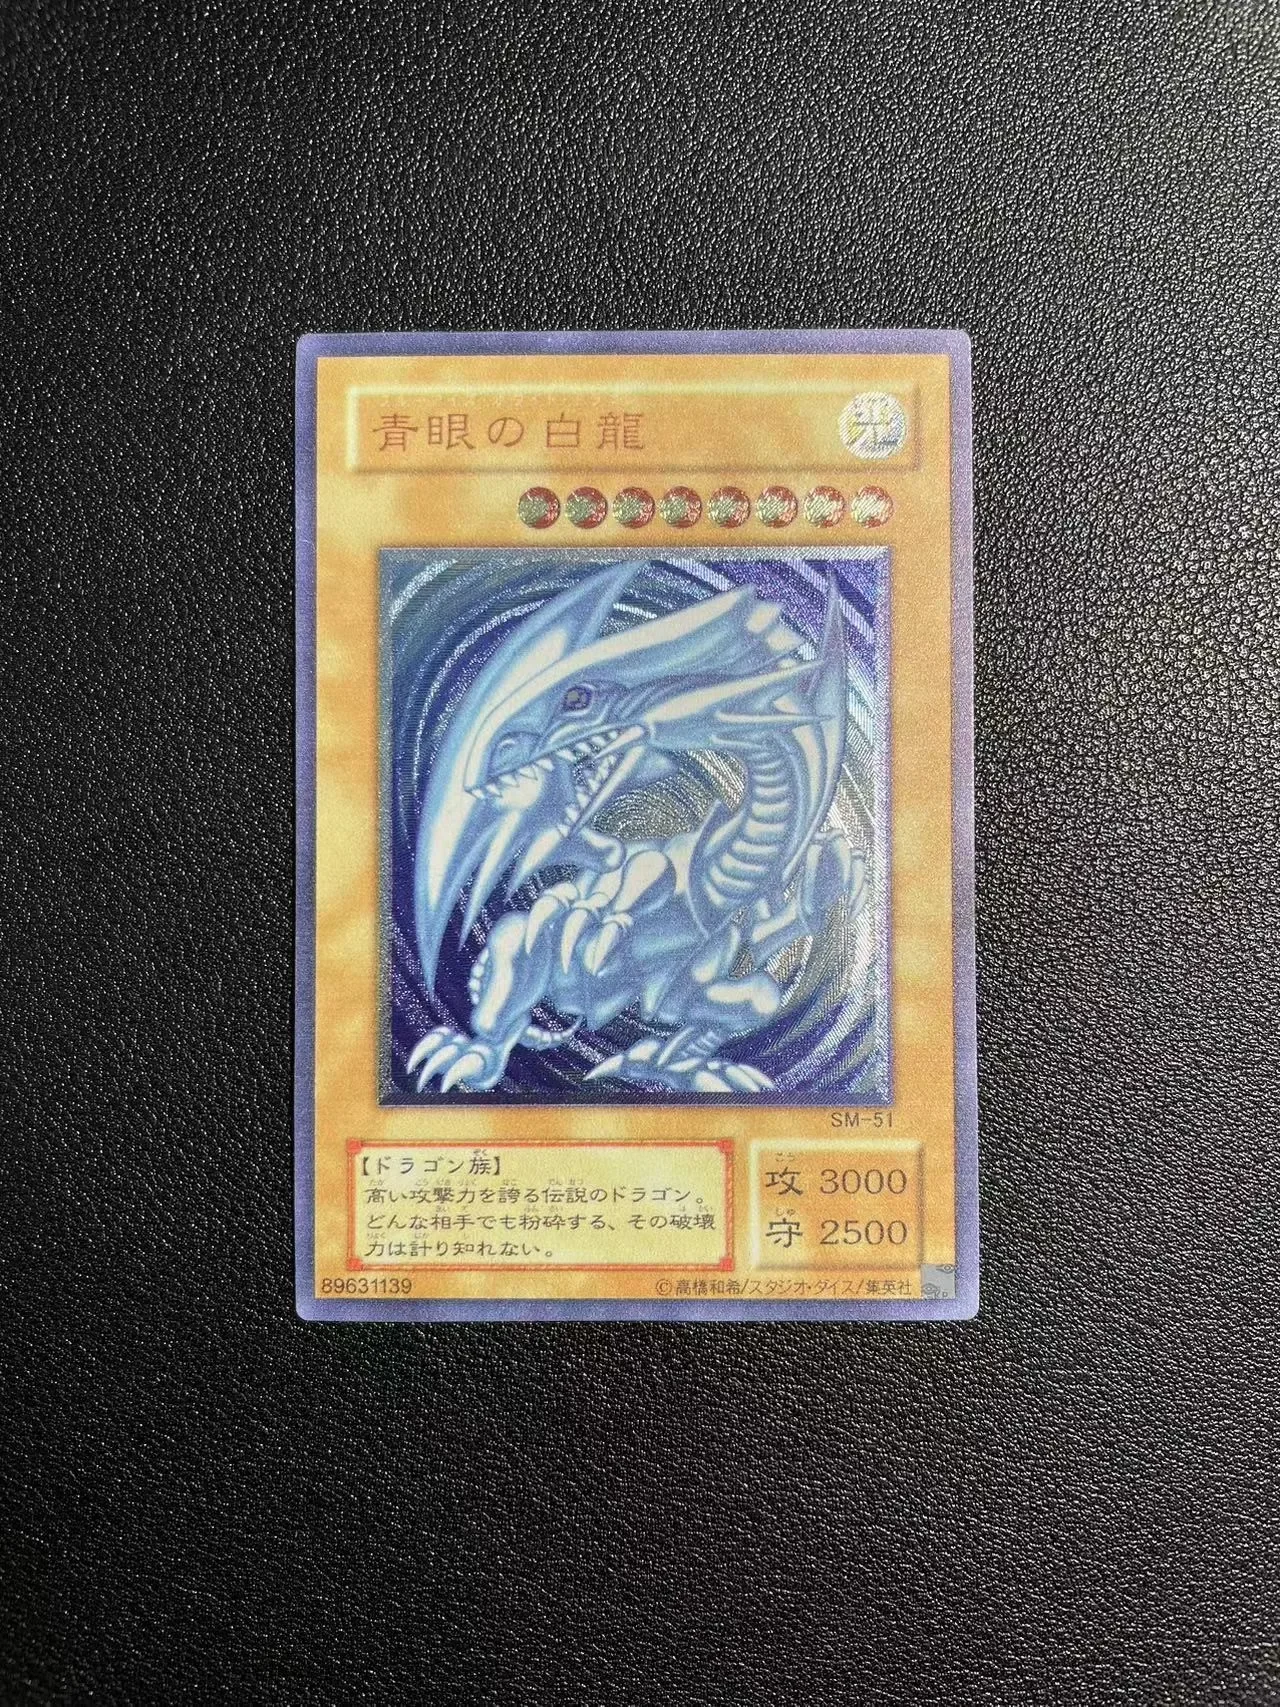 

Yu-Gi-Oh Ultimate Rare SM-51/Blue-Eyes White Dragon Children's anime cartoon game card toys collection gift（Not Original)